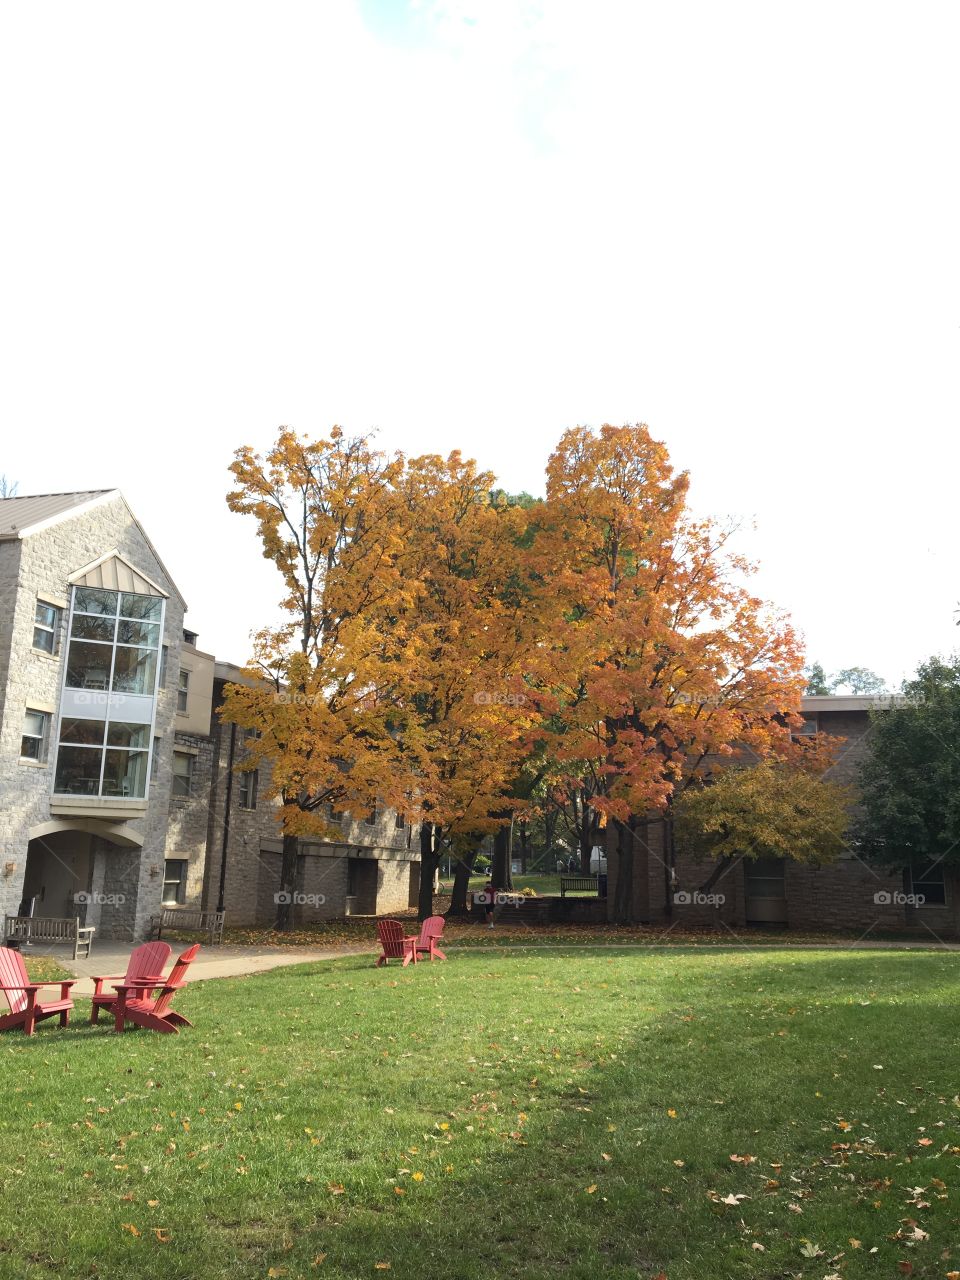 A residential quad at Dickinson College at the start of a mild autumn